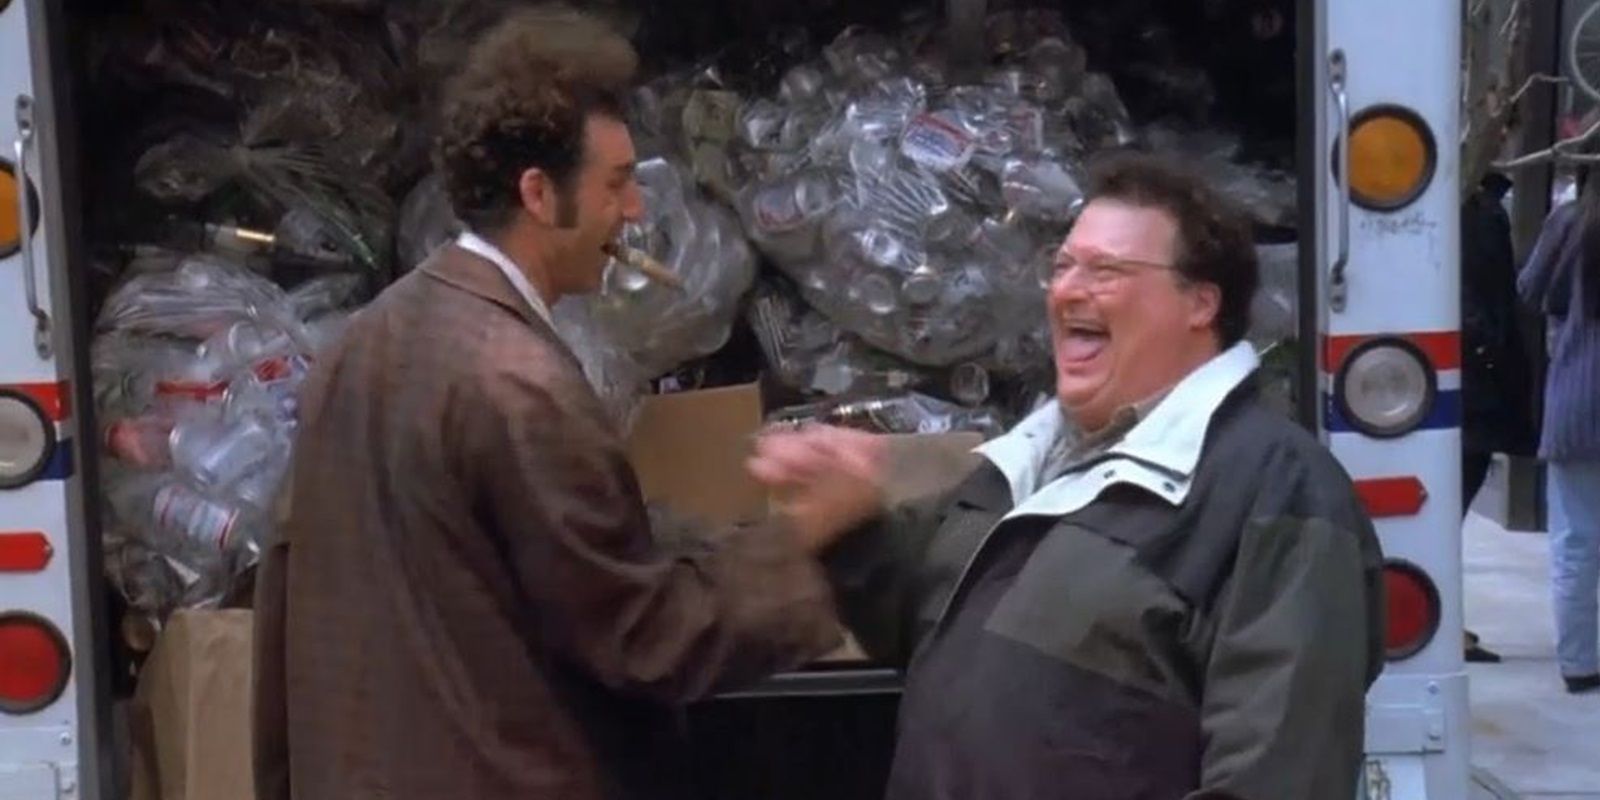 The Worst Thing Each Main Character From Seinfeld Has Done